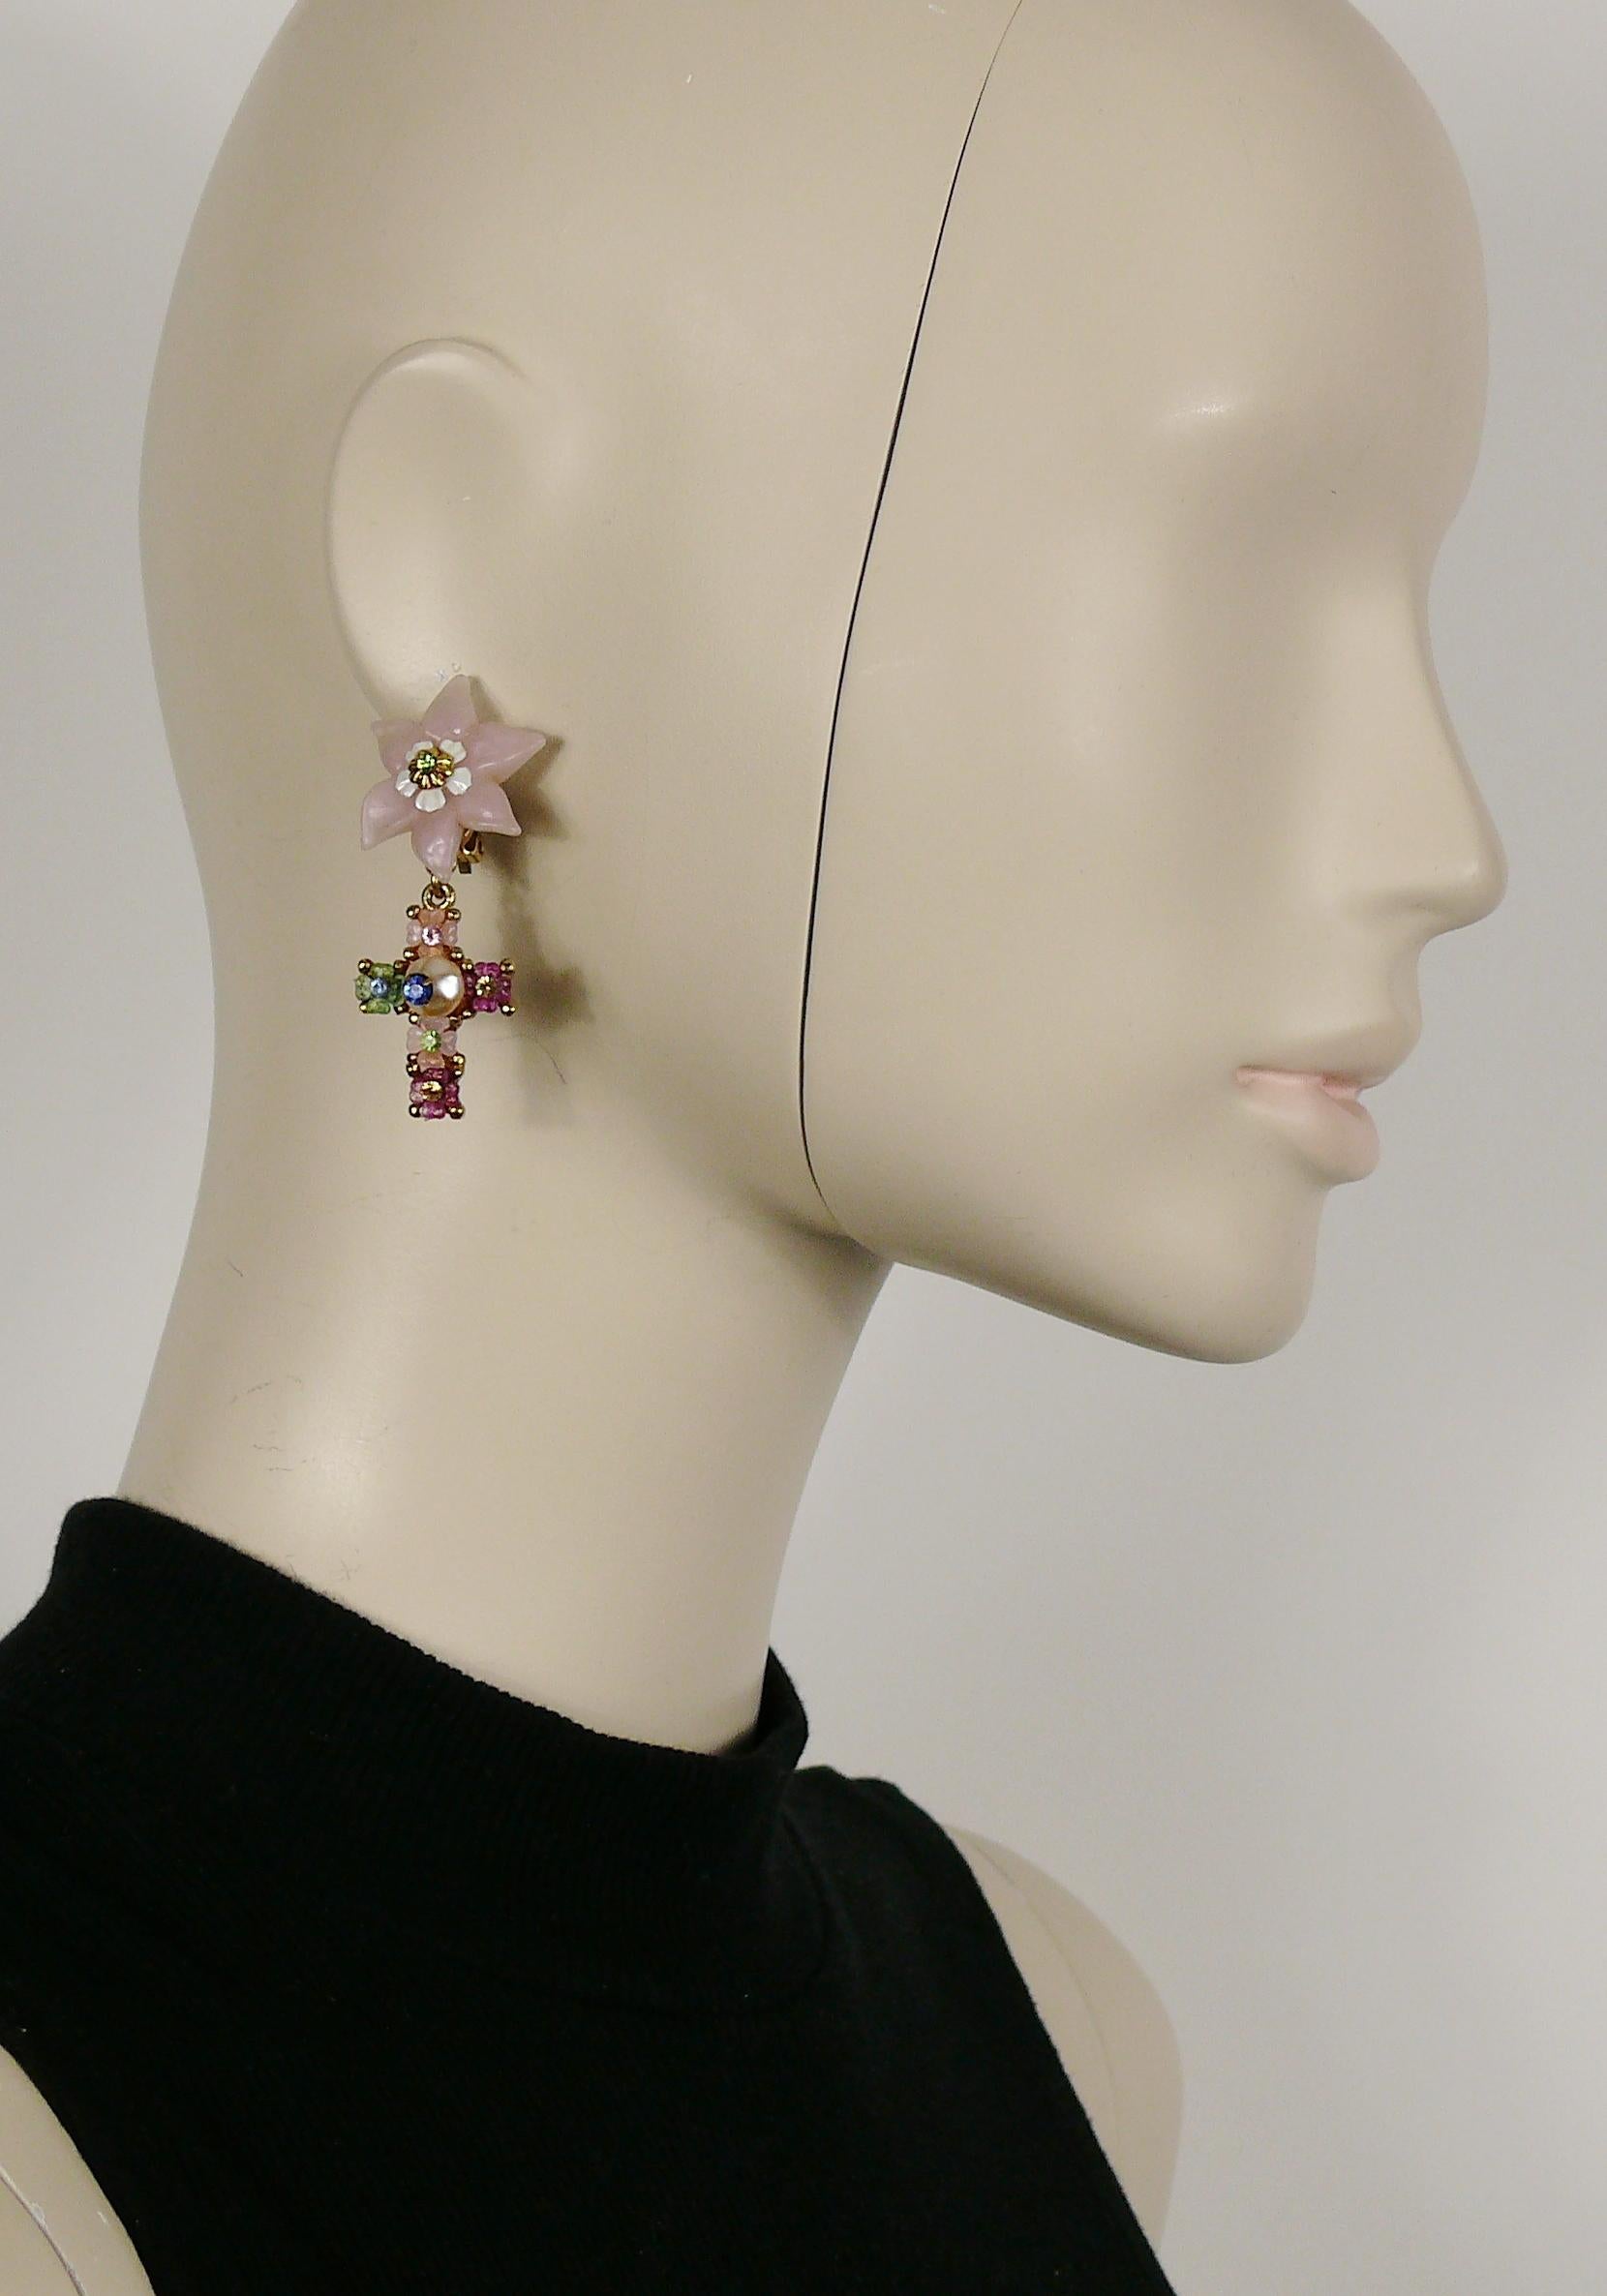 CHRISTIAN LACROIX vintage jewelled dangling earrings (clip-on) featuring iridescent pink resin flower top, cross charm embellished with multicolored resin flower, faux pearl and crystals.

Indicative measurements : height approx. 5.5 cm (2.17